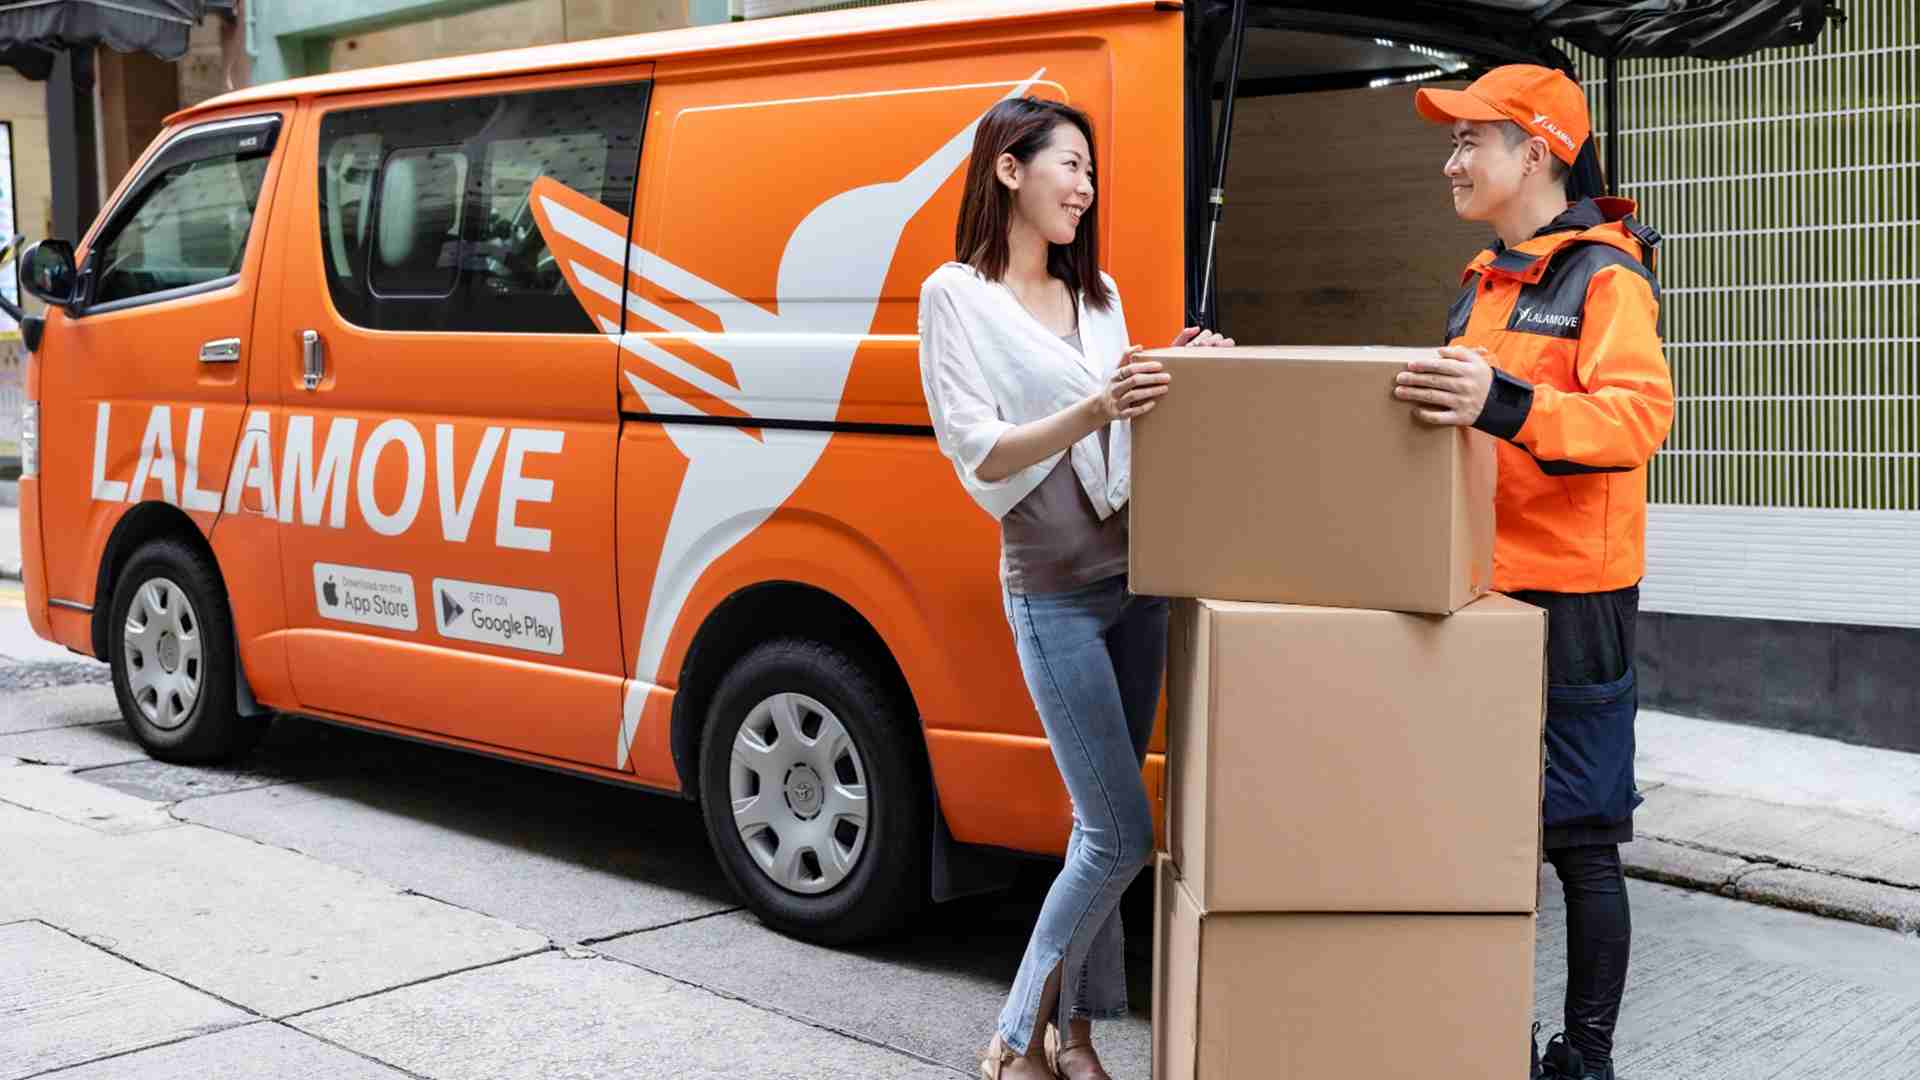 How A Clothing Supplier Succeeds With Lalamove On-Demand Deliveries